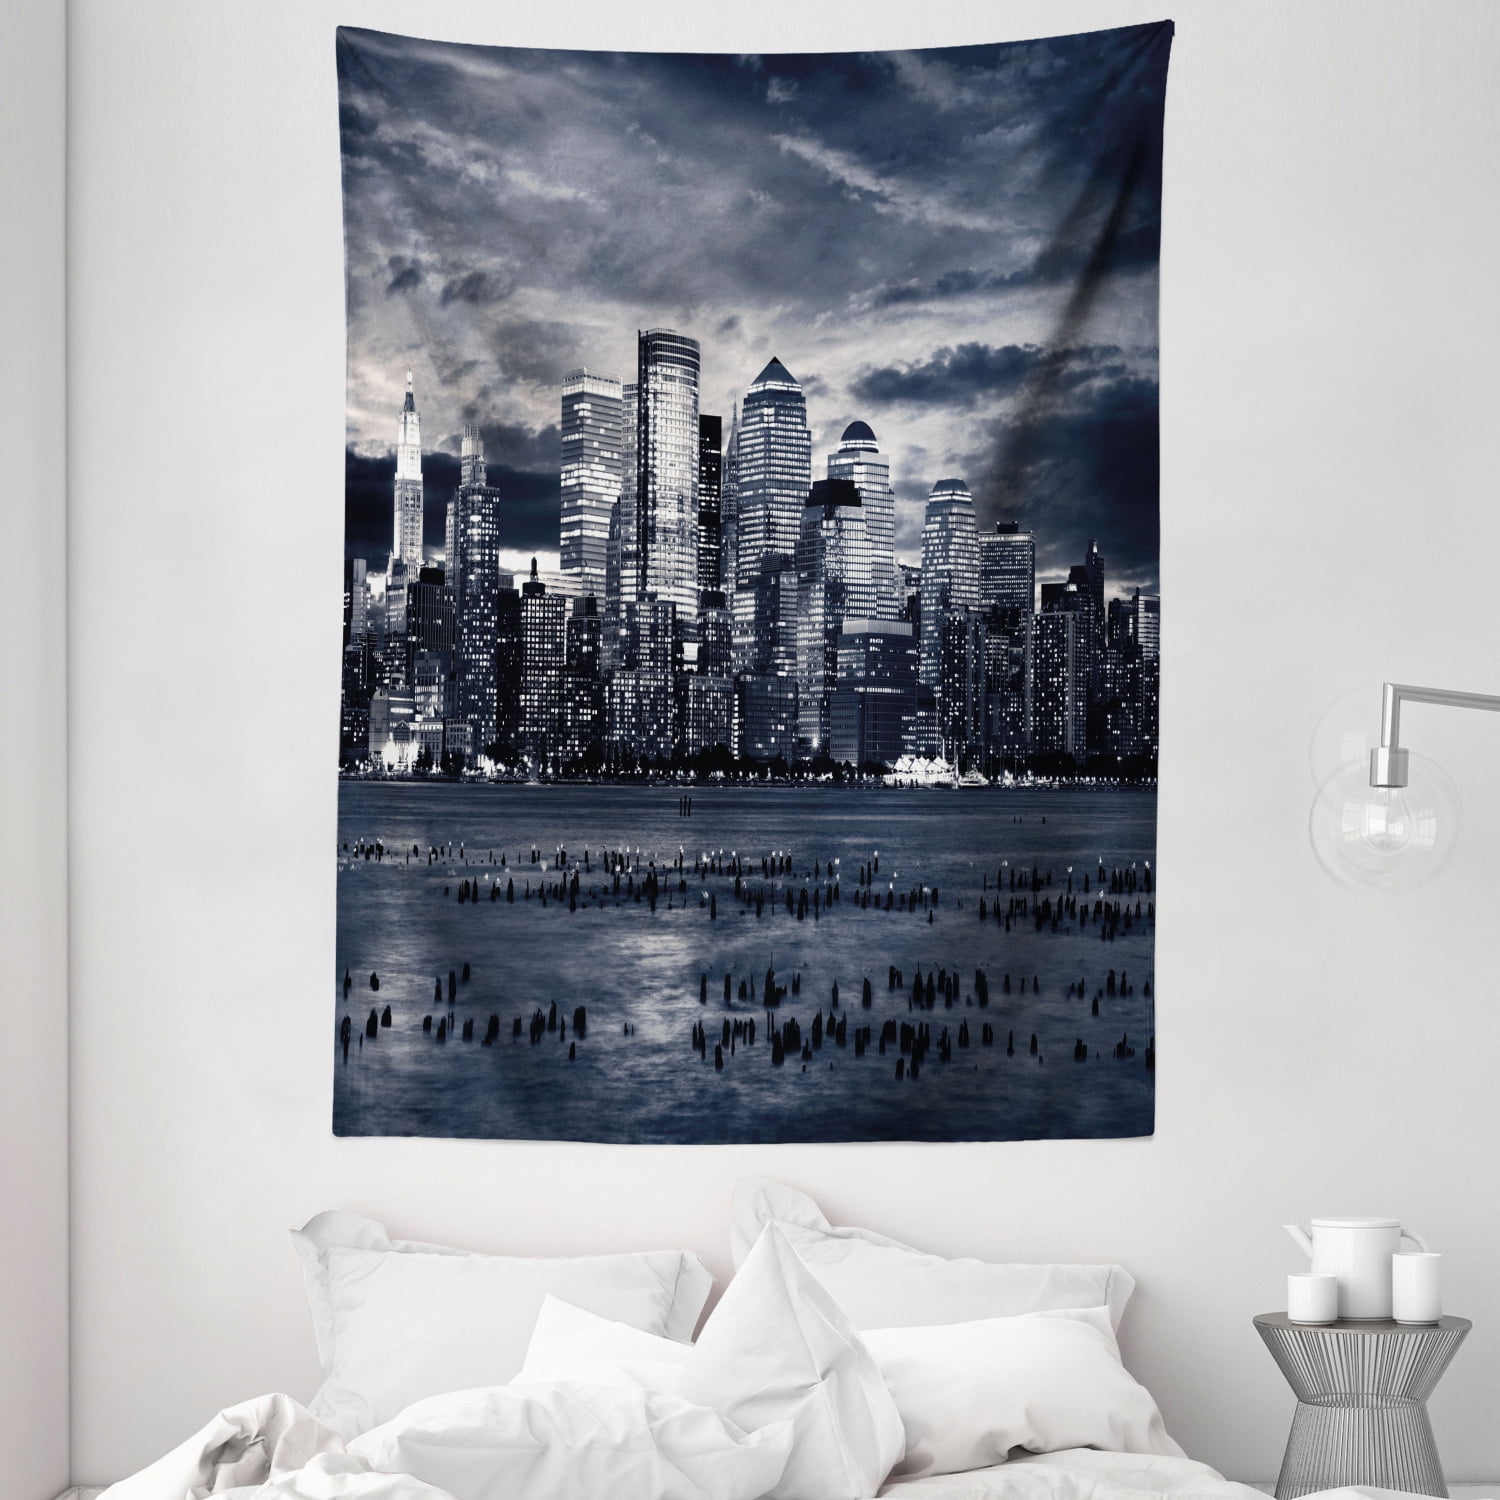 City Tapestry, Dramatic View of New York Skyline from the Jersey Side ...